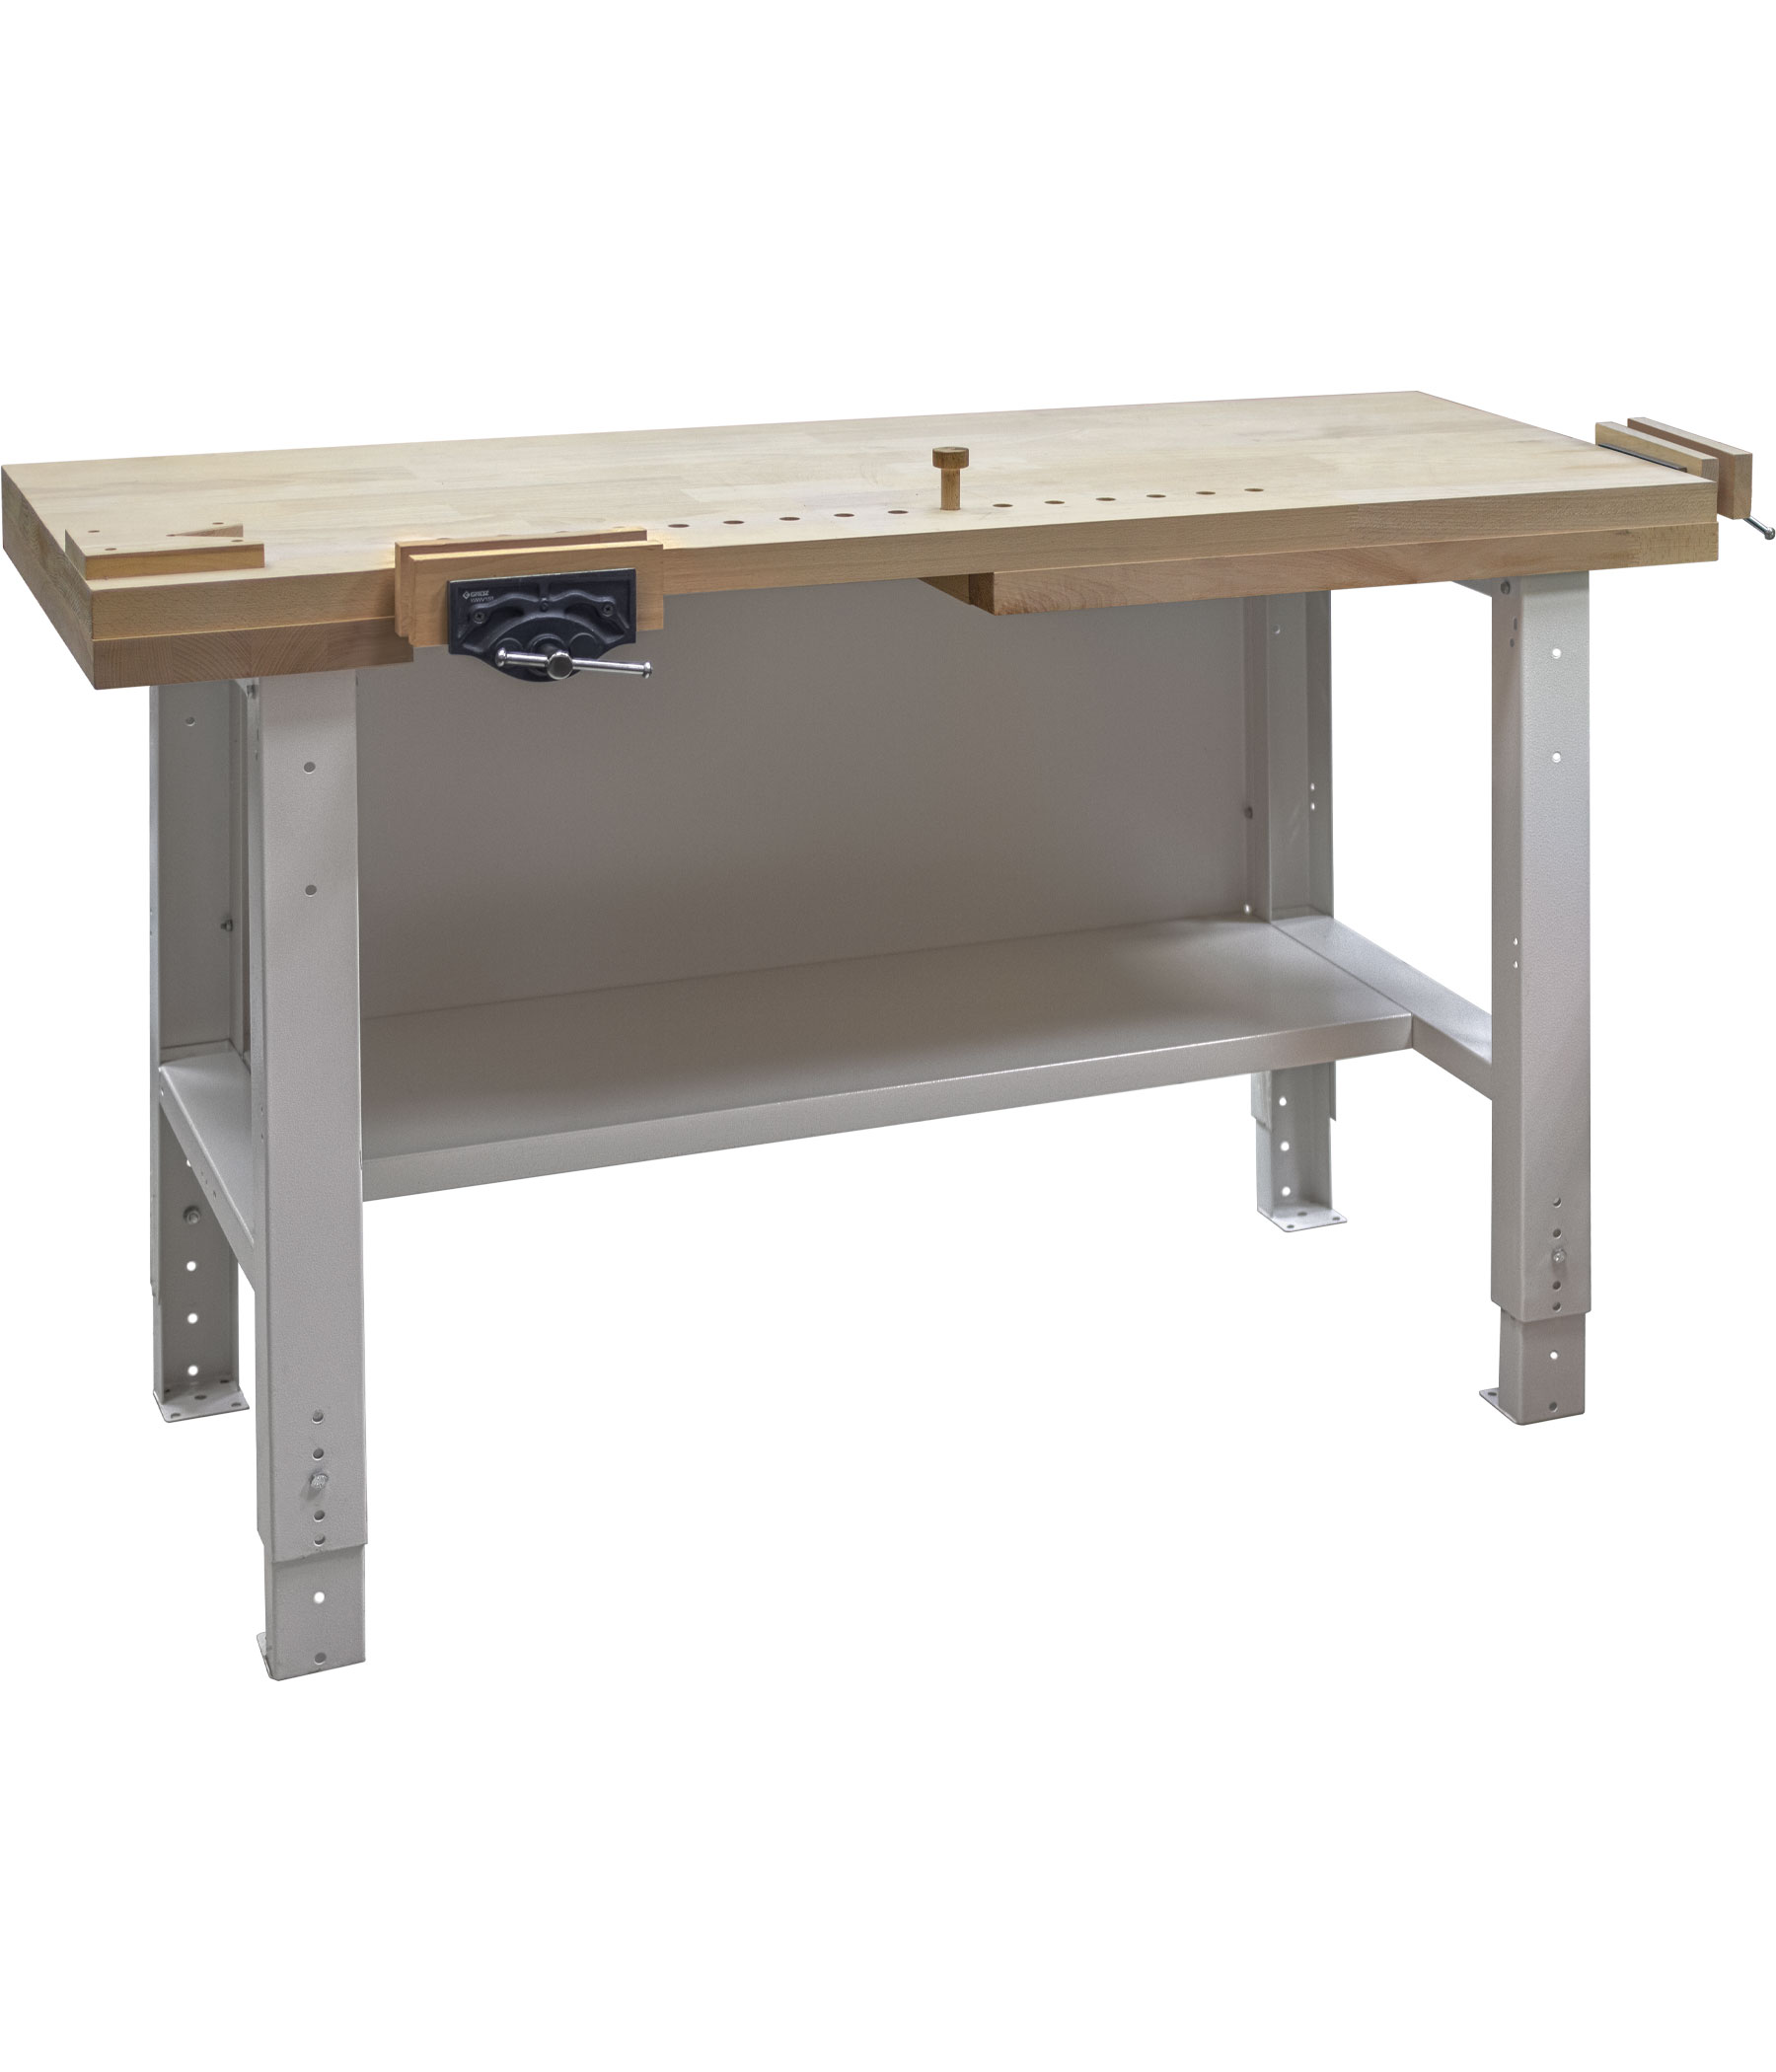 Joiner workbench VS 31 FV/SV with front and side vice pack